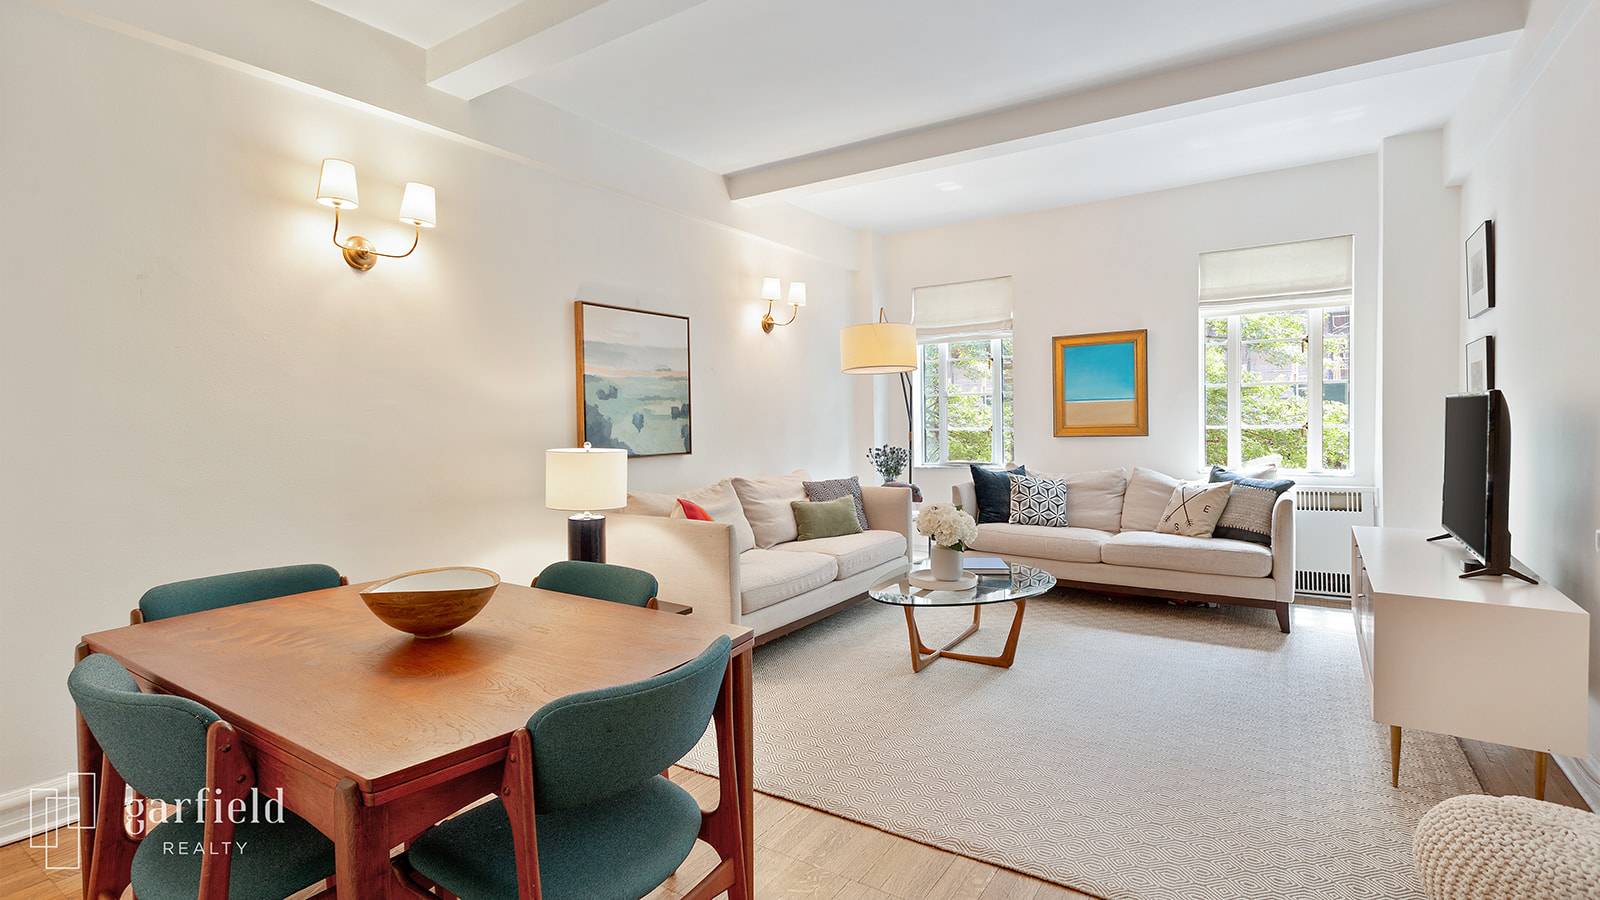 Located on coveted Eighth Avenue in a pristine Art Deco full service doorman elevator building, this serene, elegant, and well proportioned home boasts an impeccable renovation that merges prewar detail ...